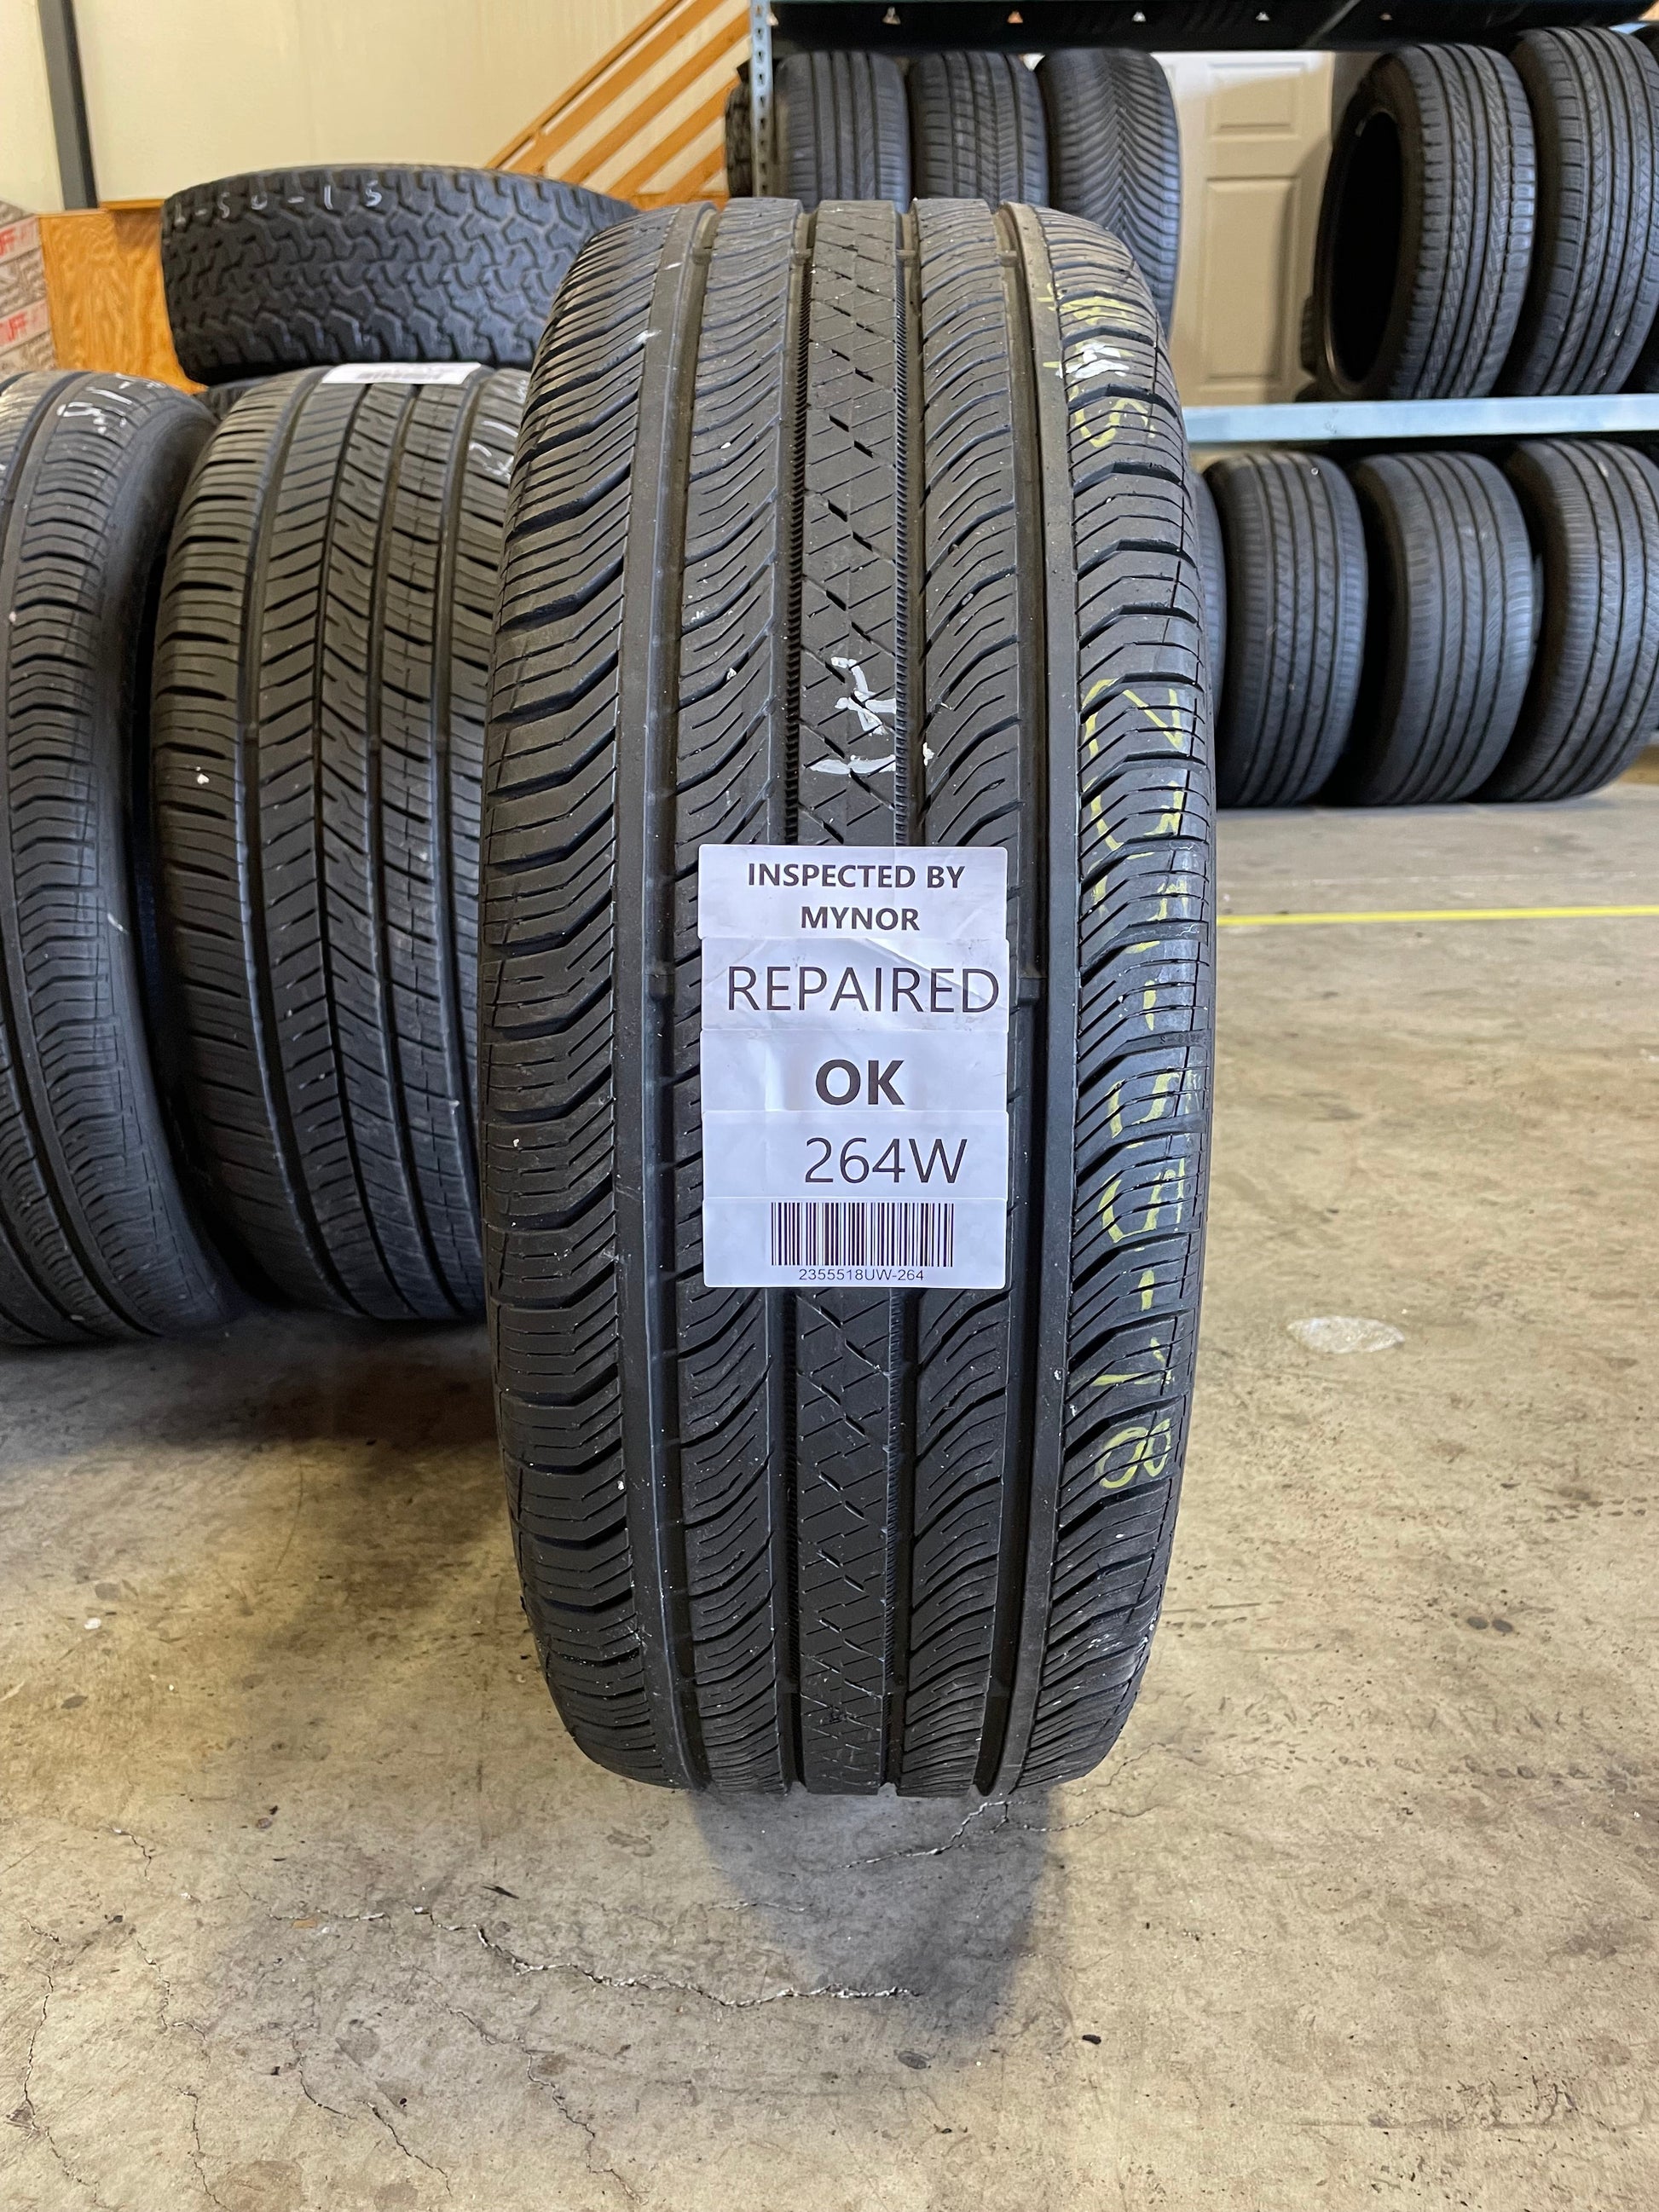 SINGLE 235/55R18 Continental ProContact TX 100 H SL - Used Tires